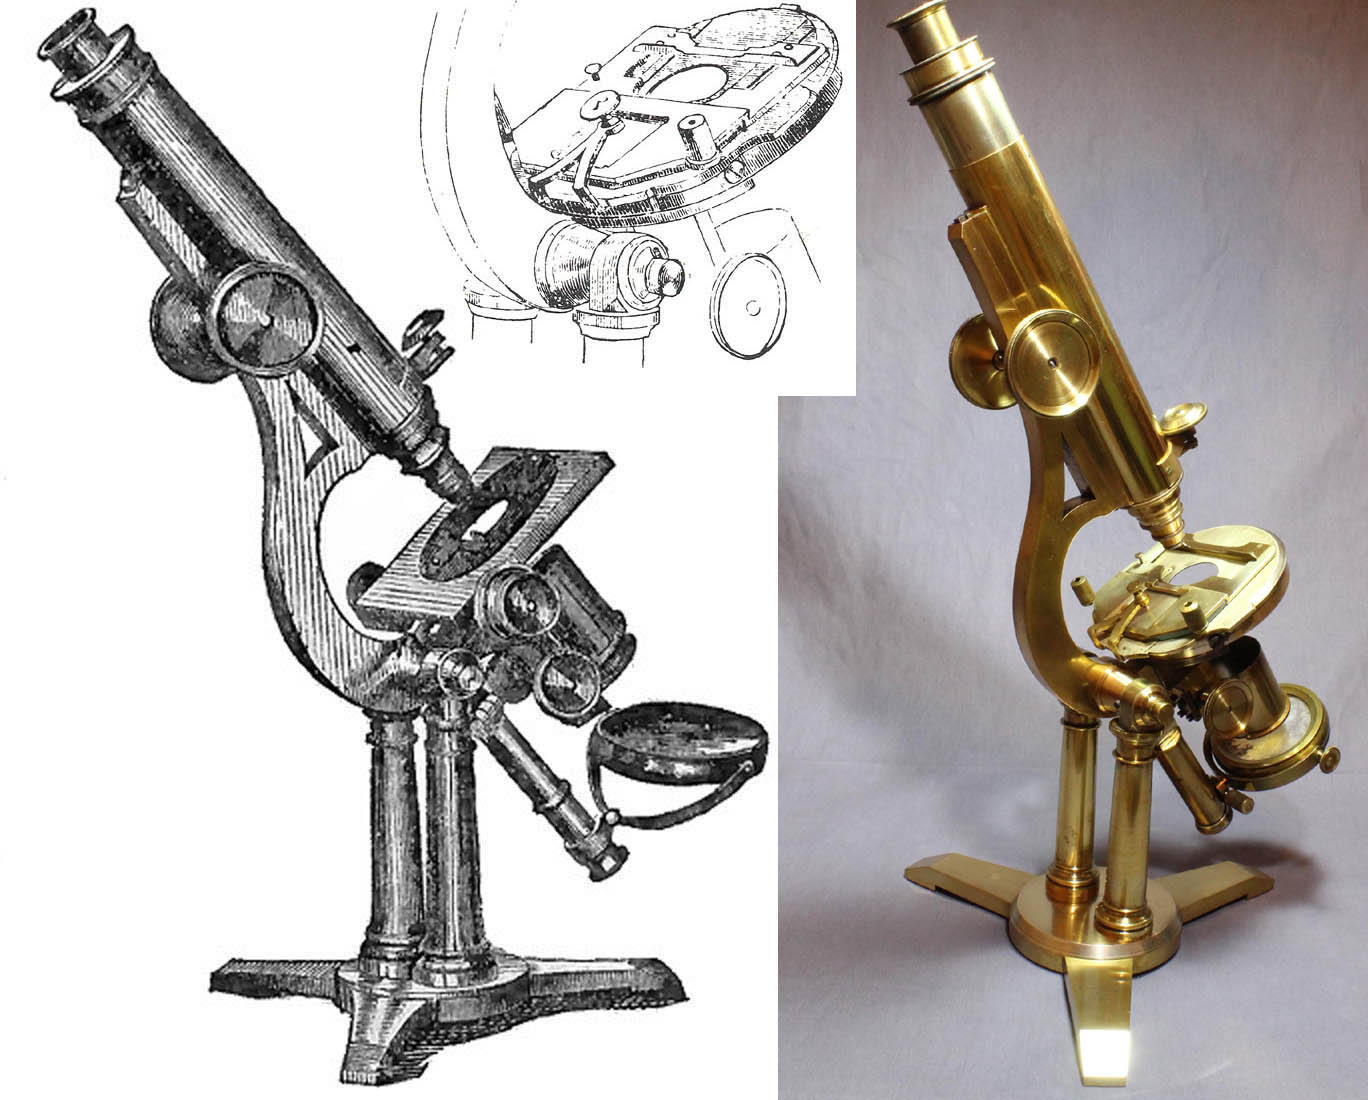 Zentmayer Grand American Microscope with Engraving